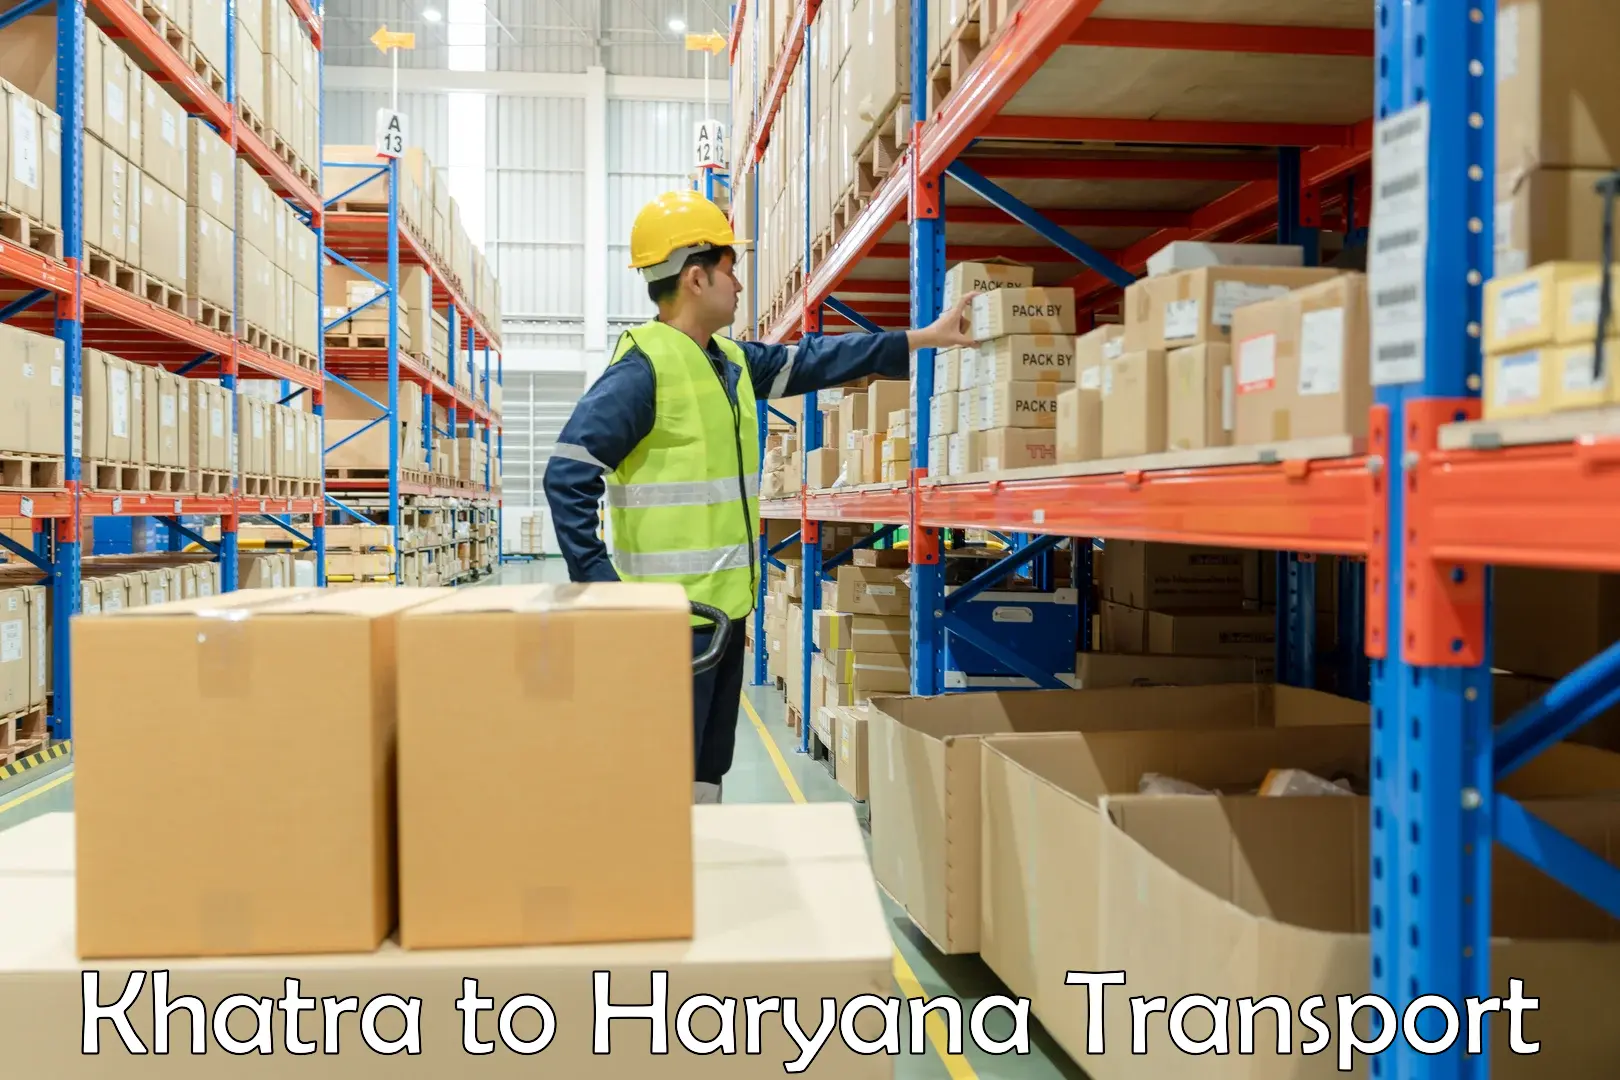 Container transportation services in Khatra to NCR Haryana